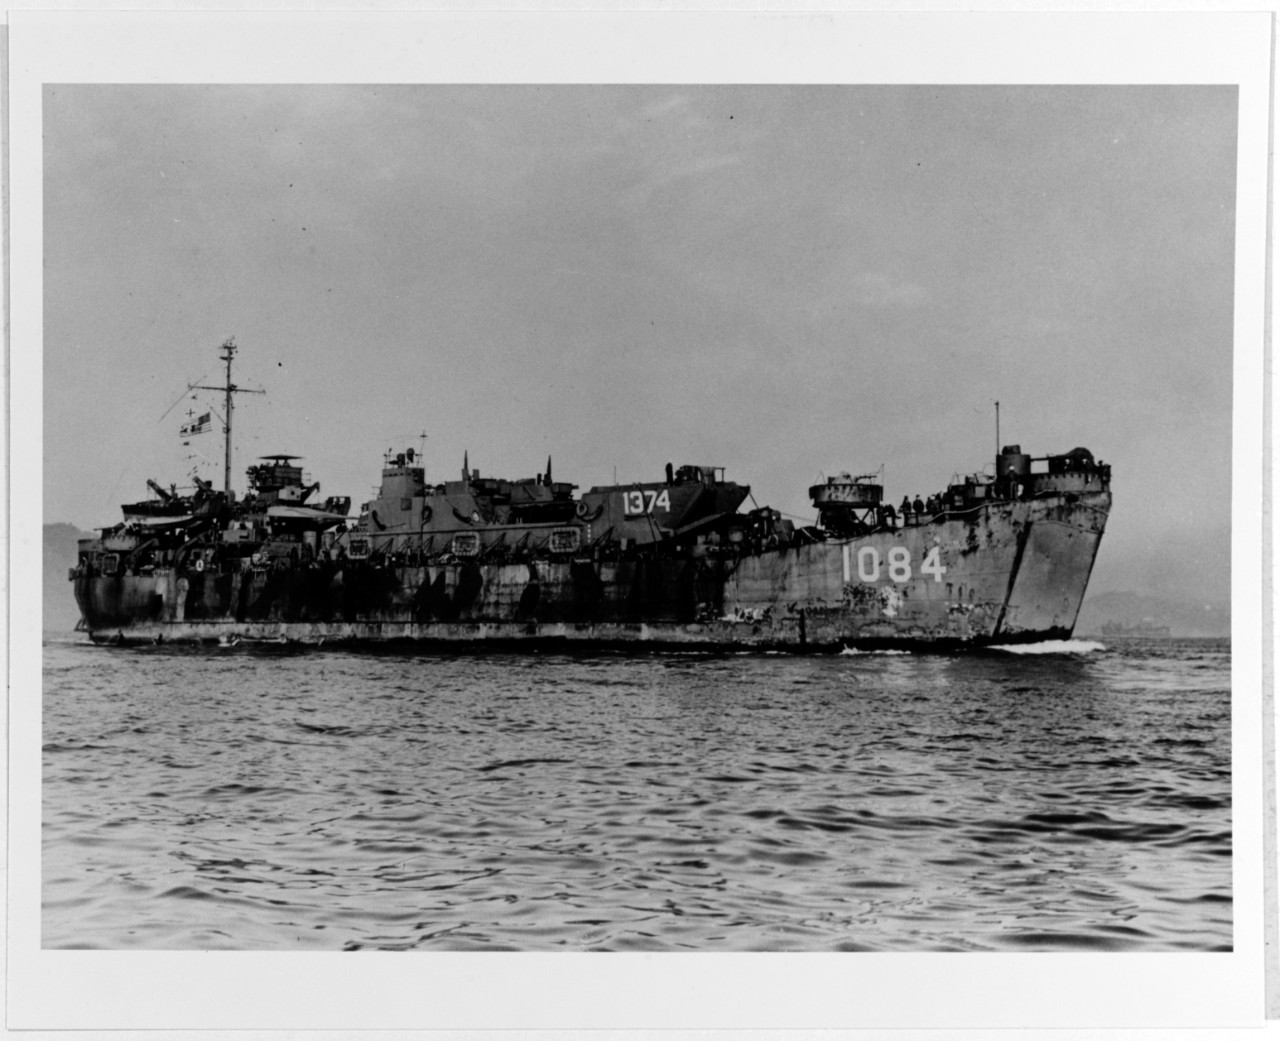 USS LST-1084 (Later: Polk County)